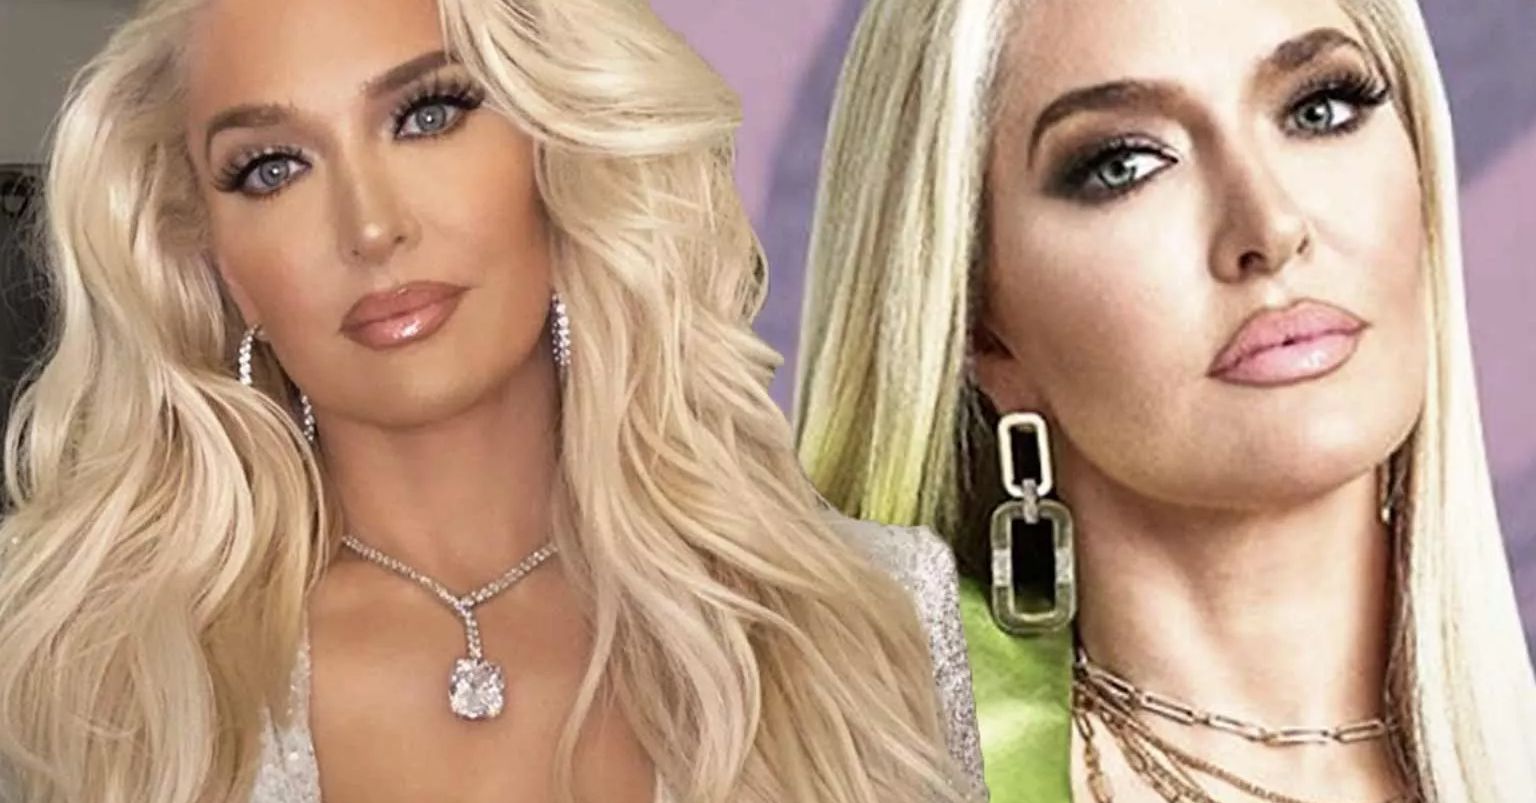 Rhobh Star Erika Jayne Slams Hater Who Calls Her A Gold Digger On